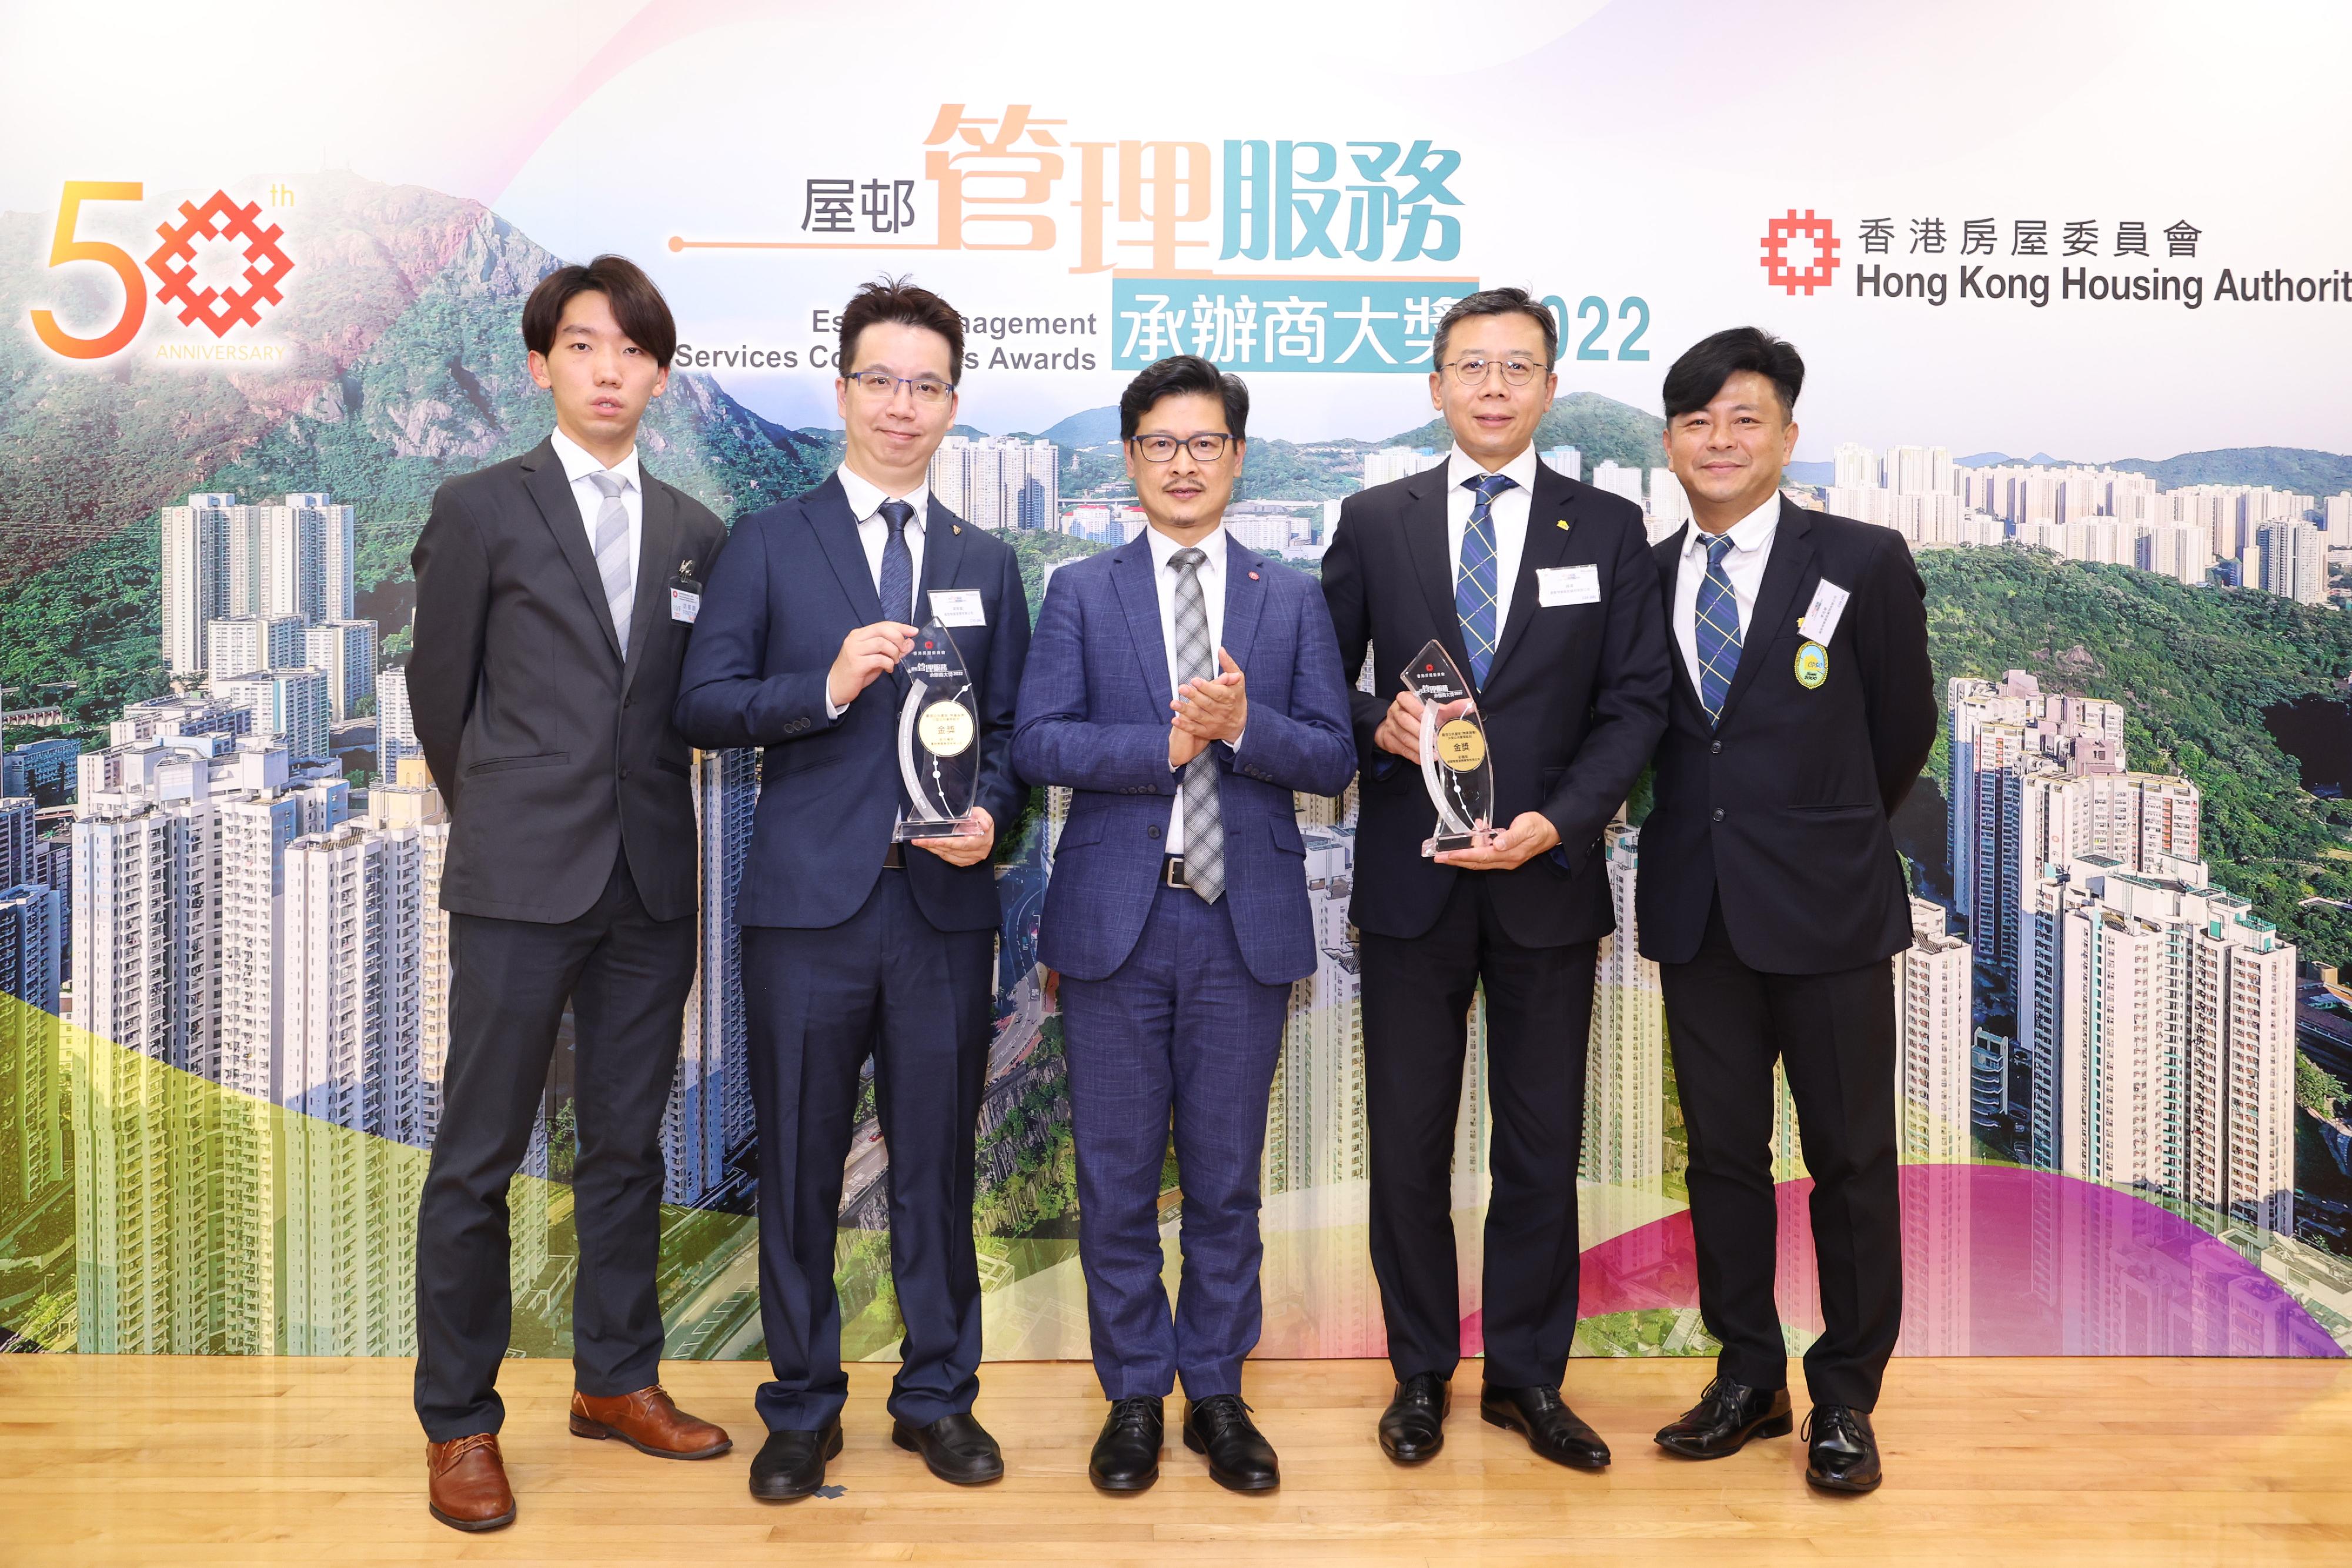 The Hong Kong Housing Authority (HA) hosted the Estate Management Services Contractors Awards 2022 presentation ceremony at the HA Headquarters in Ho Man Tin today (March 22). Photo shows the Deputy Director of Housing (Estate Management), Mr Ricky Yeung (centre), and representatives of the winner of Gold Awards of Best Public Rental Housing Estate (Property Services) (Large Estate) and Best Public Rental Housing Estate (Property Services) (Small Estate).